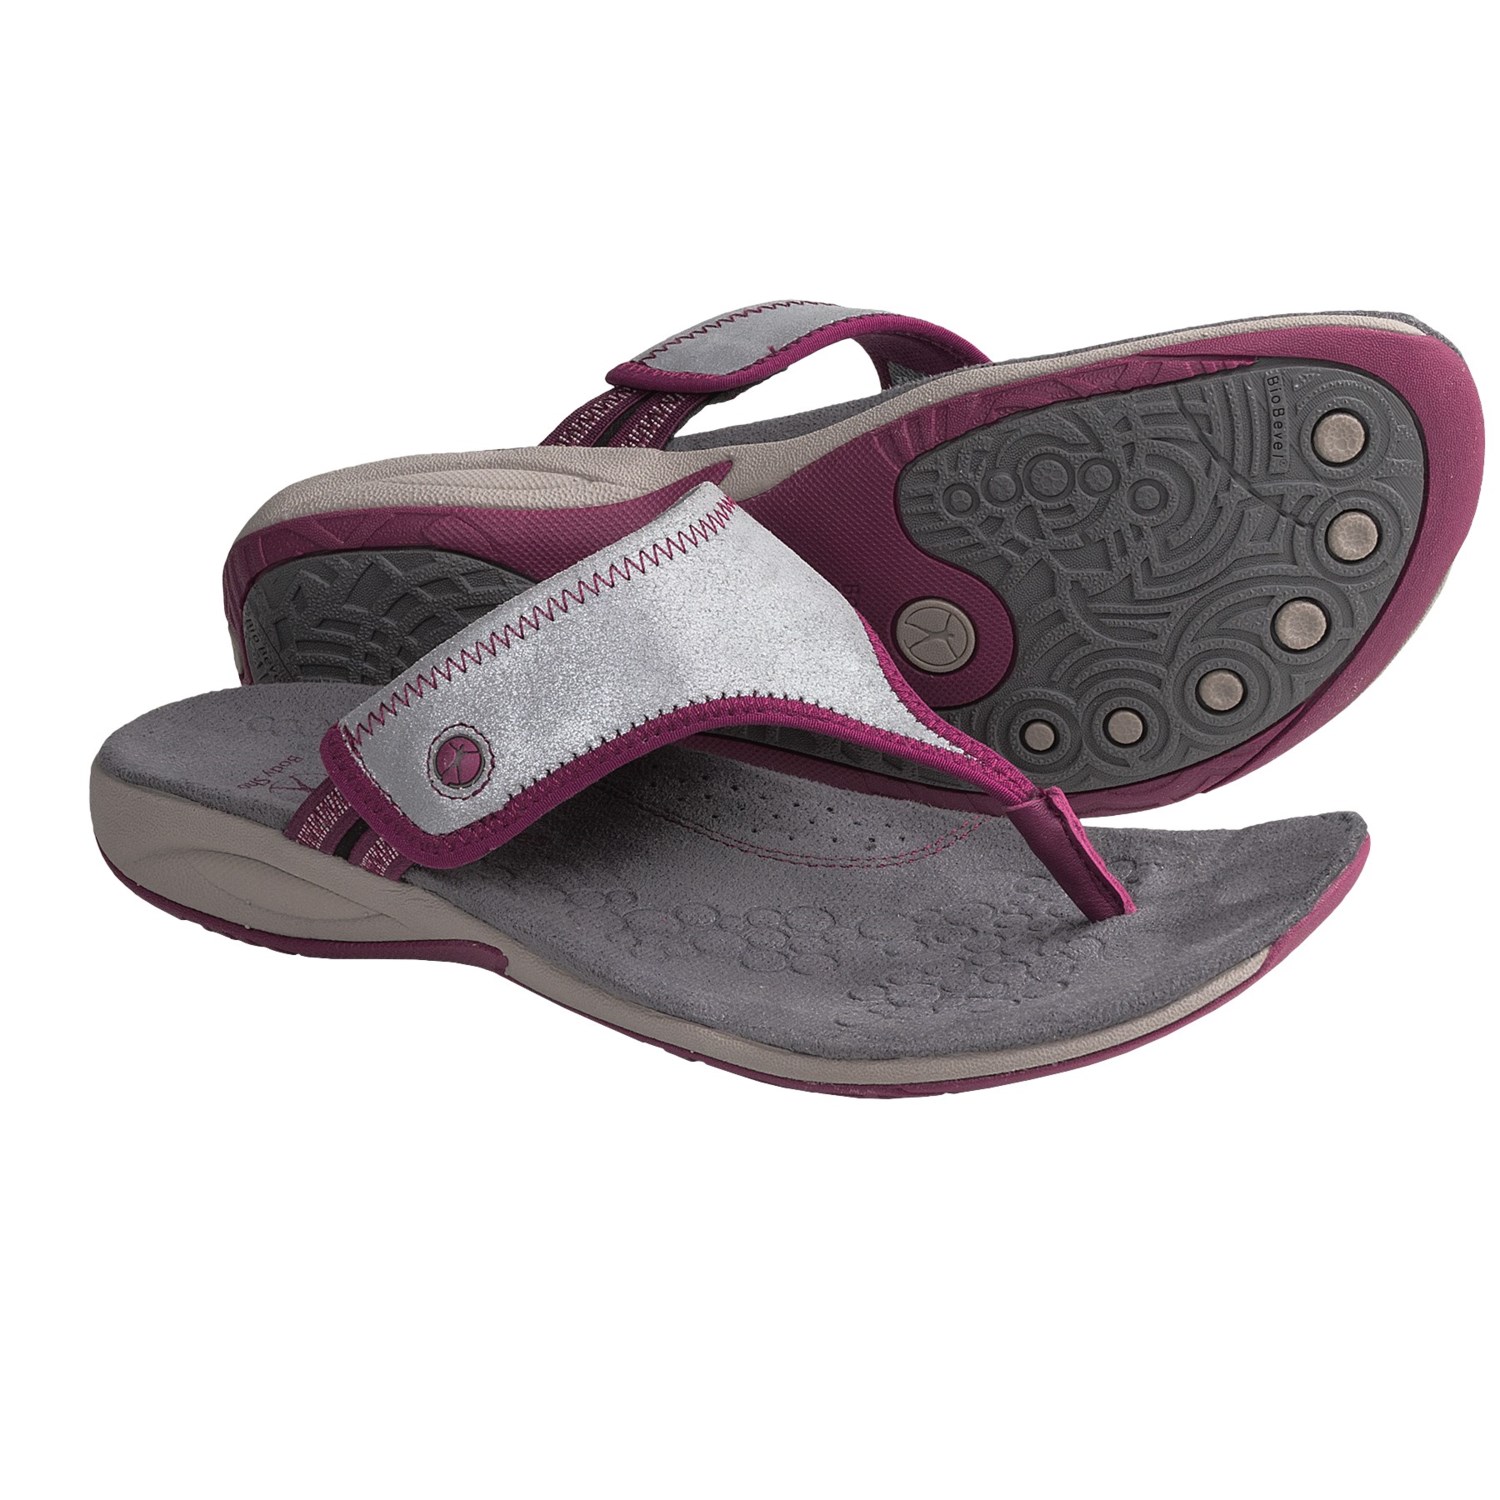 Hush Puppies Zendal Sandals (For Women) - Save 82%